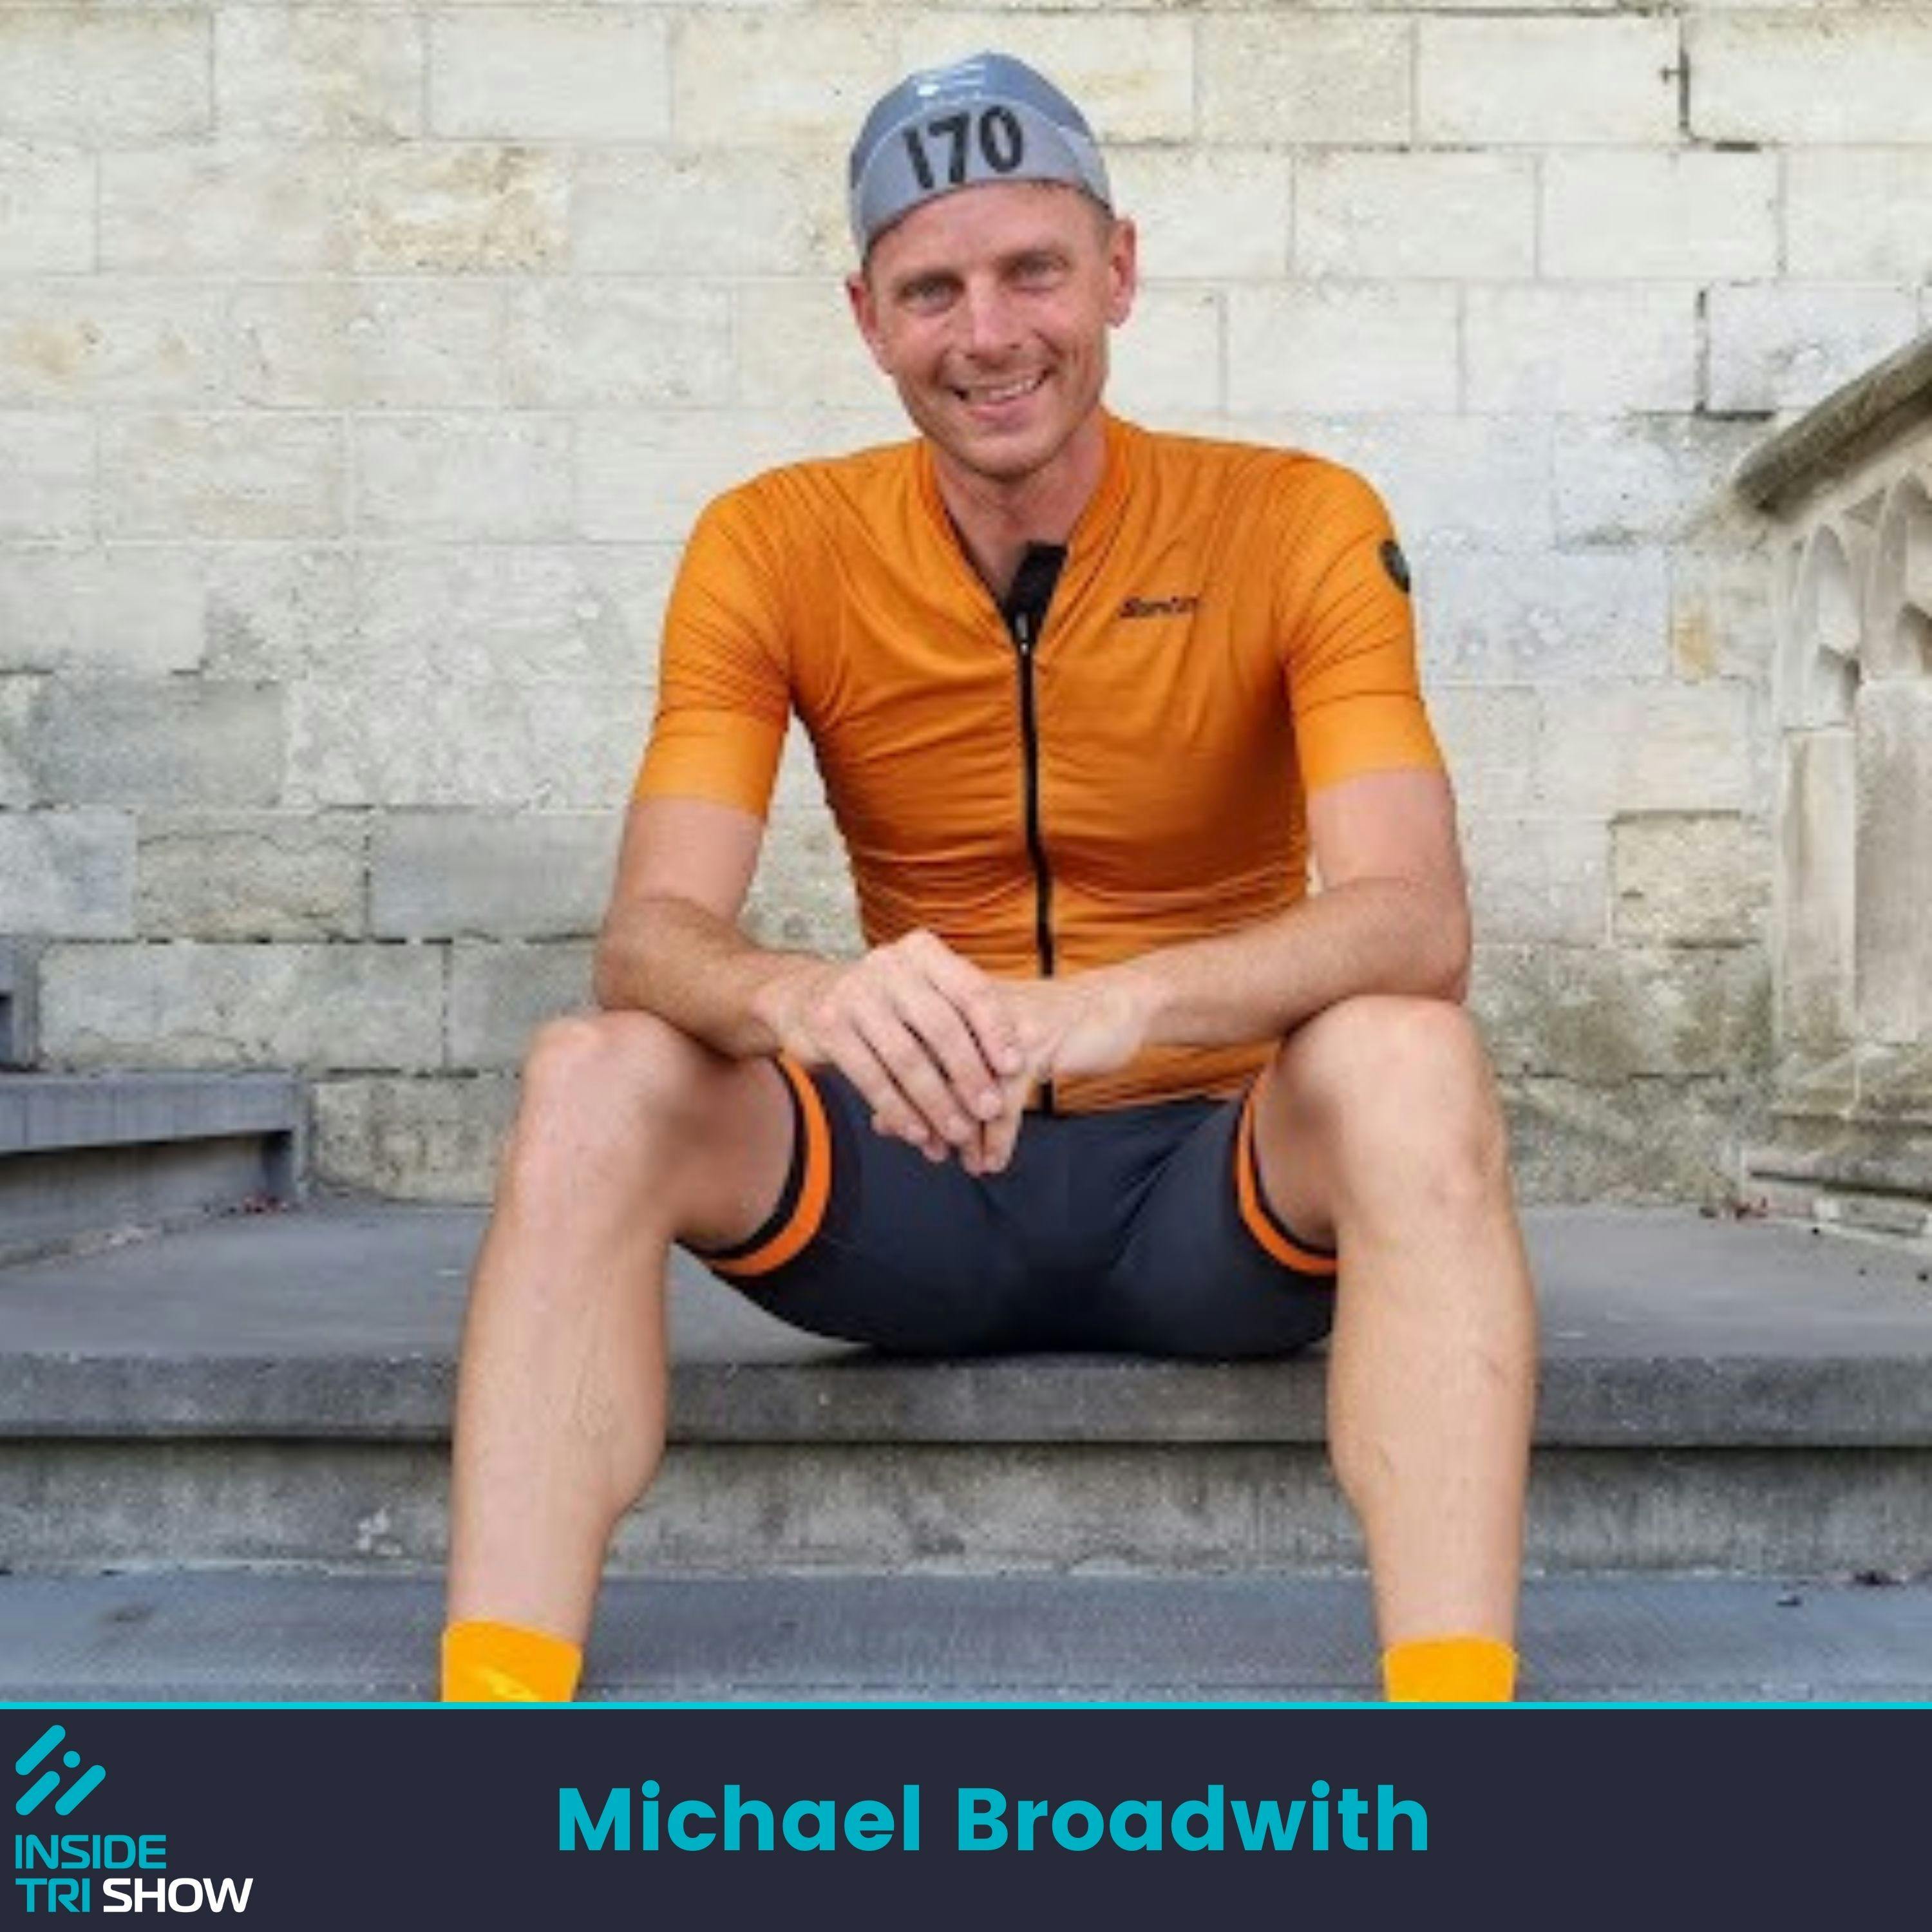 Michael Broadwith: The record breaking cyclist, dad and maths teacher